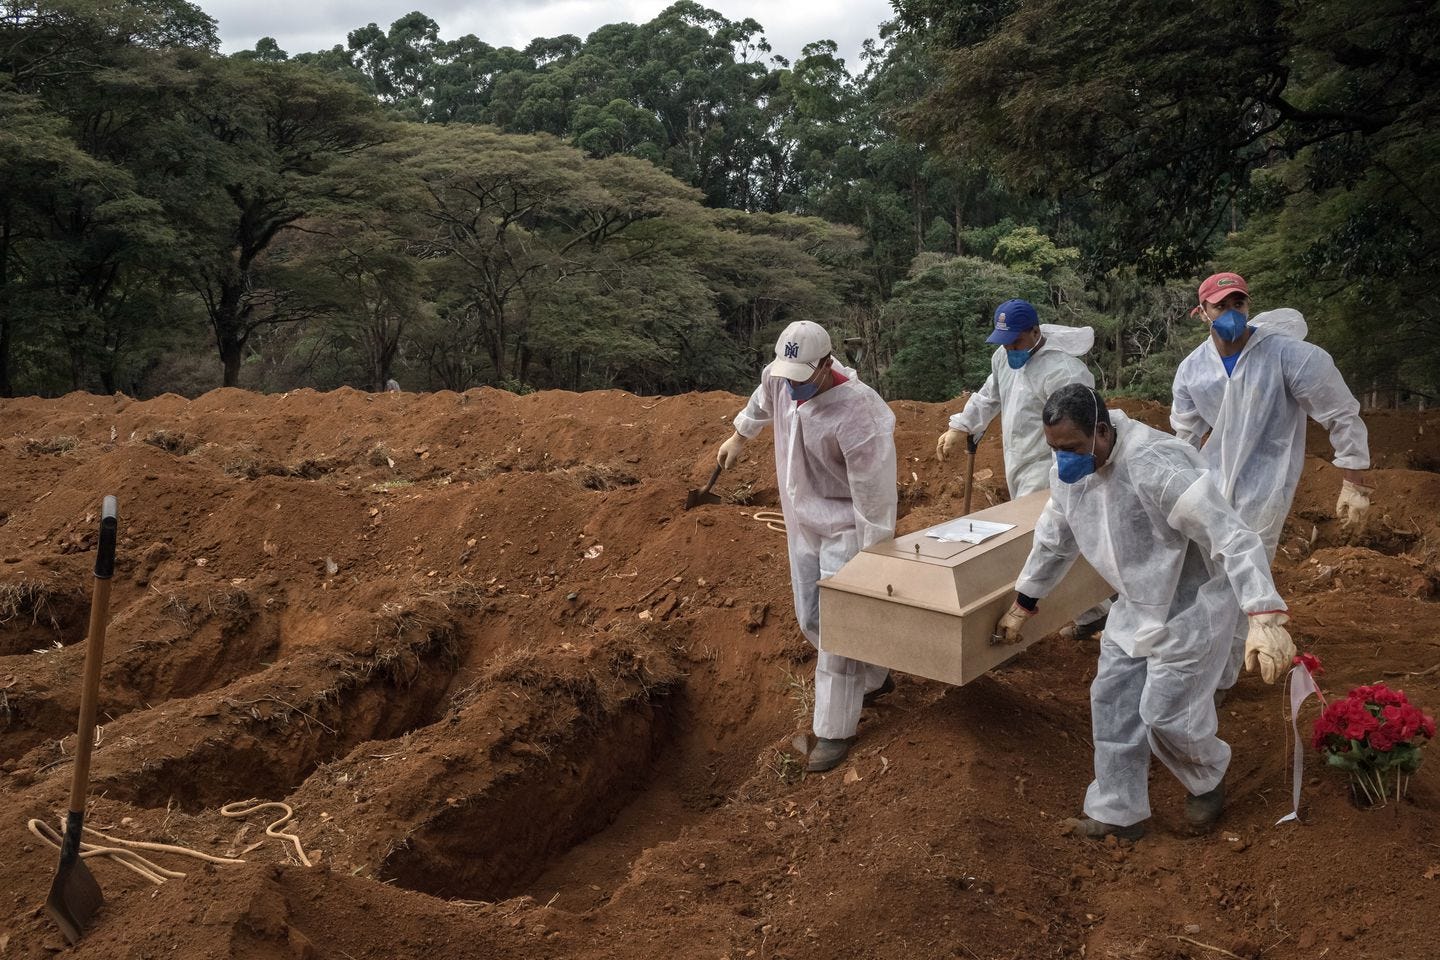 Gravediggers carried the coffin of a COVID-19 victim during a burial at Vila Formosa cemetery in São Paulo. The world’s known coronavirus death toll passed four million on Thursday, a loss roughly equivalent to the population of Los Angeles, according to the Center for Systems Science and Engineering at Johns Hopkins University.